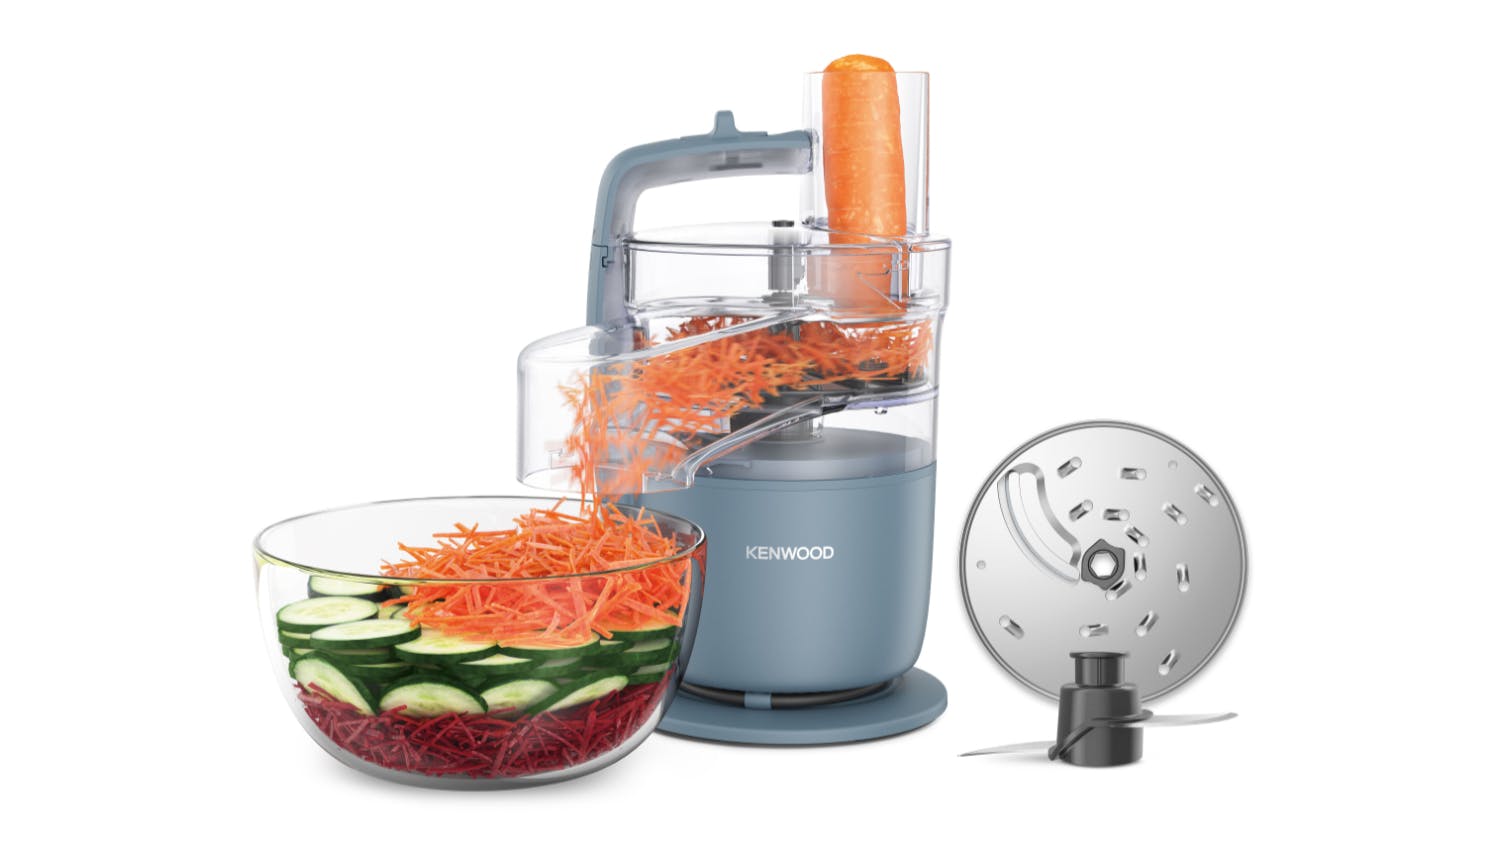 Ultra Chef Express 7 in 1 Food Chopper - As Seen on TV Manual Food Processor